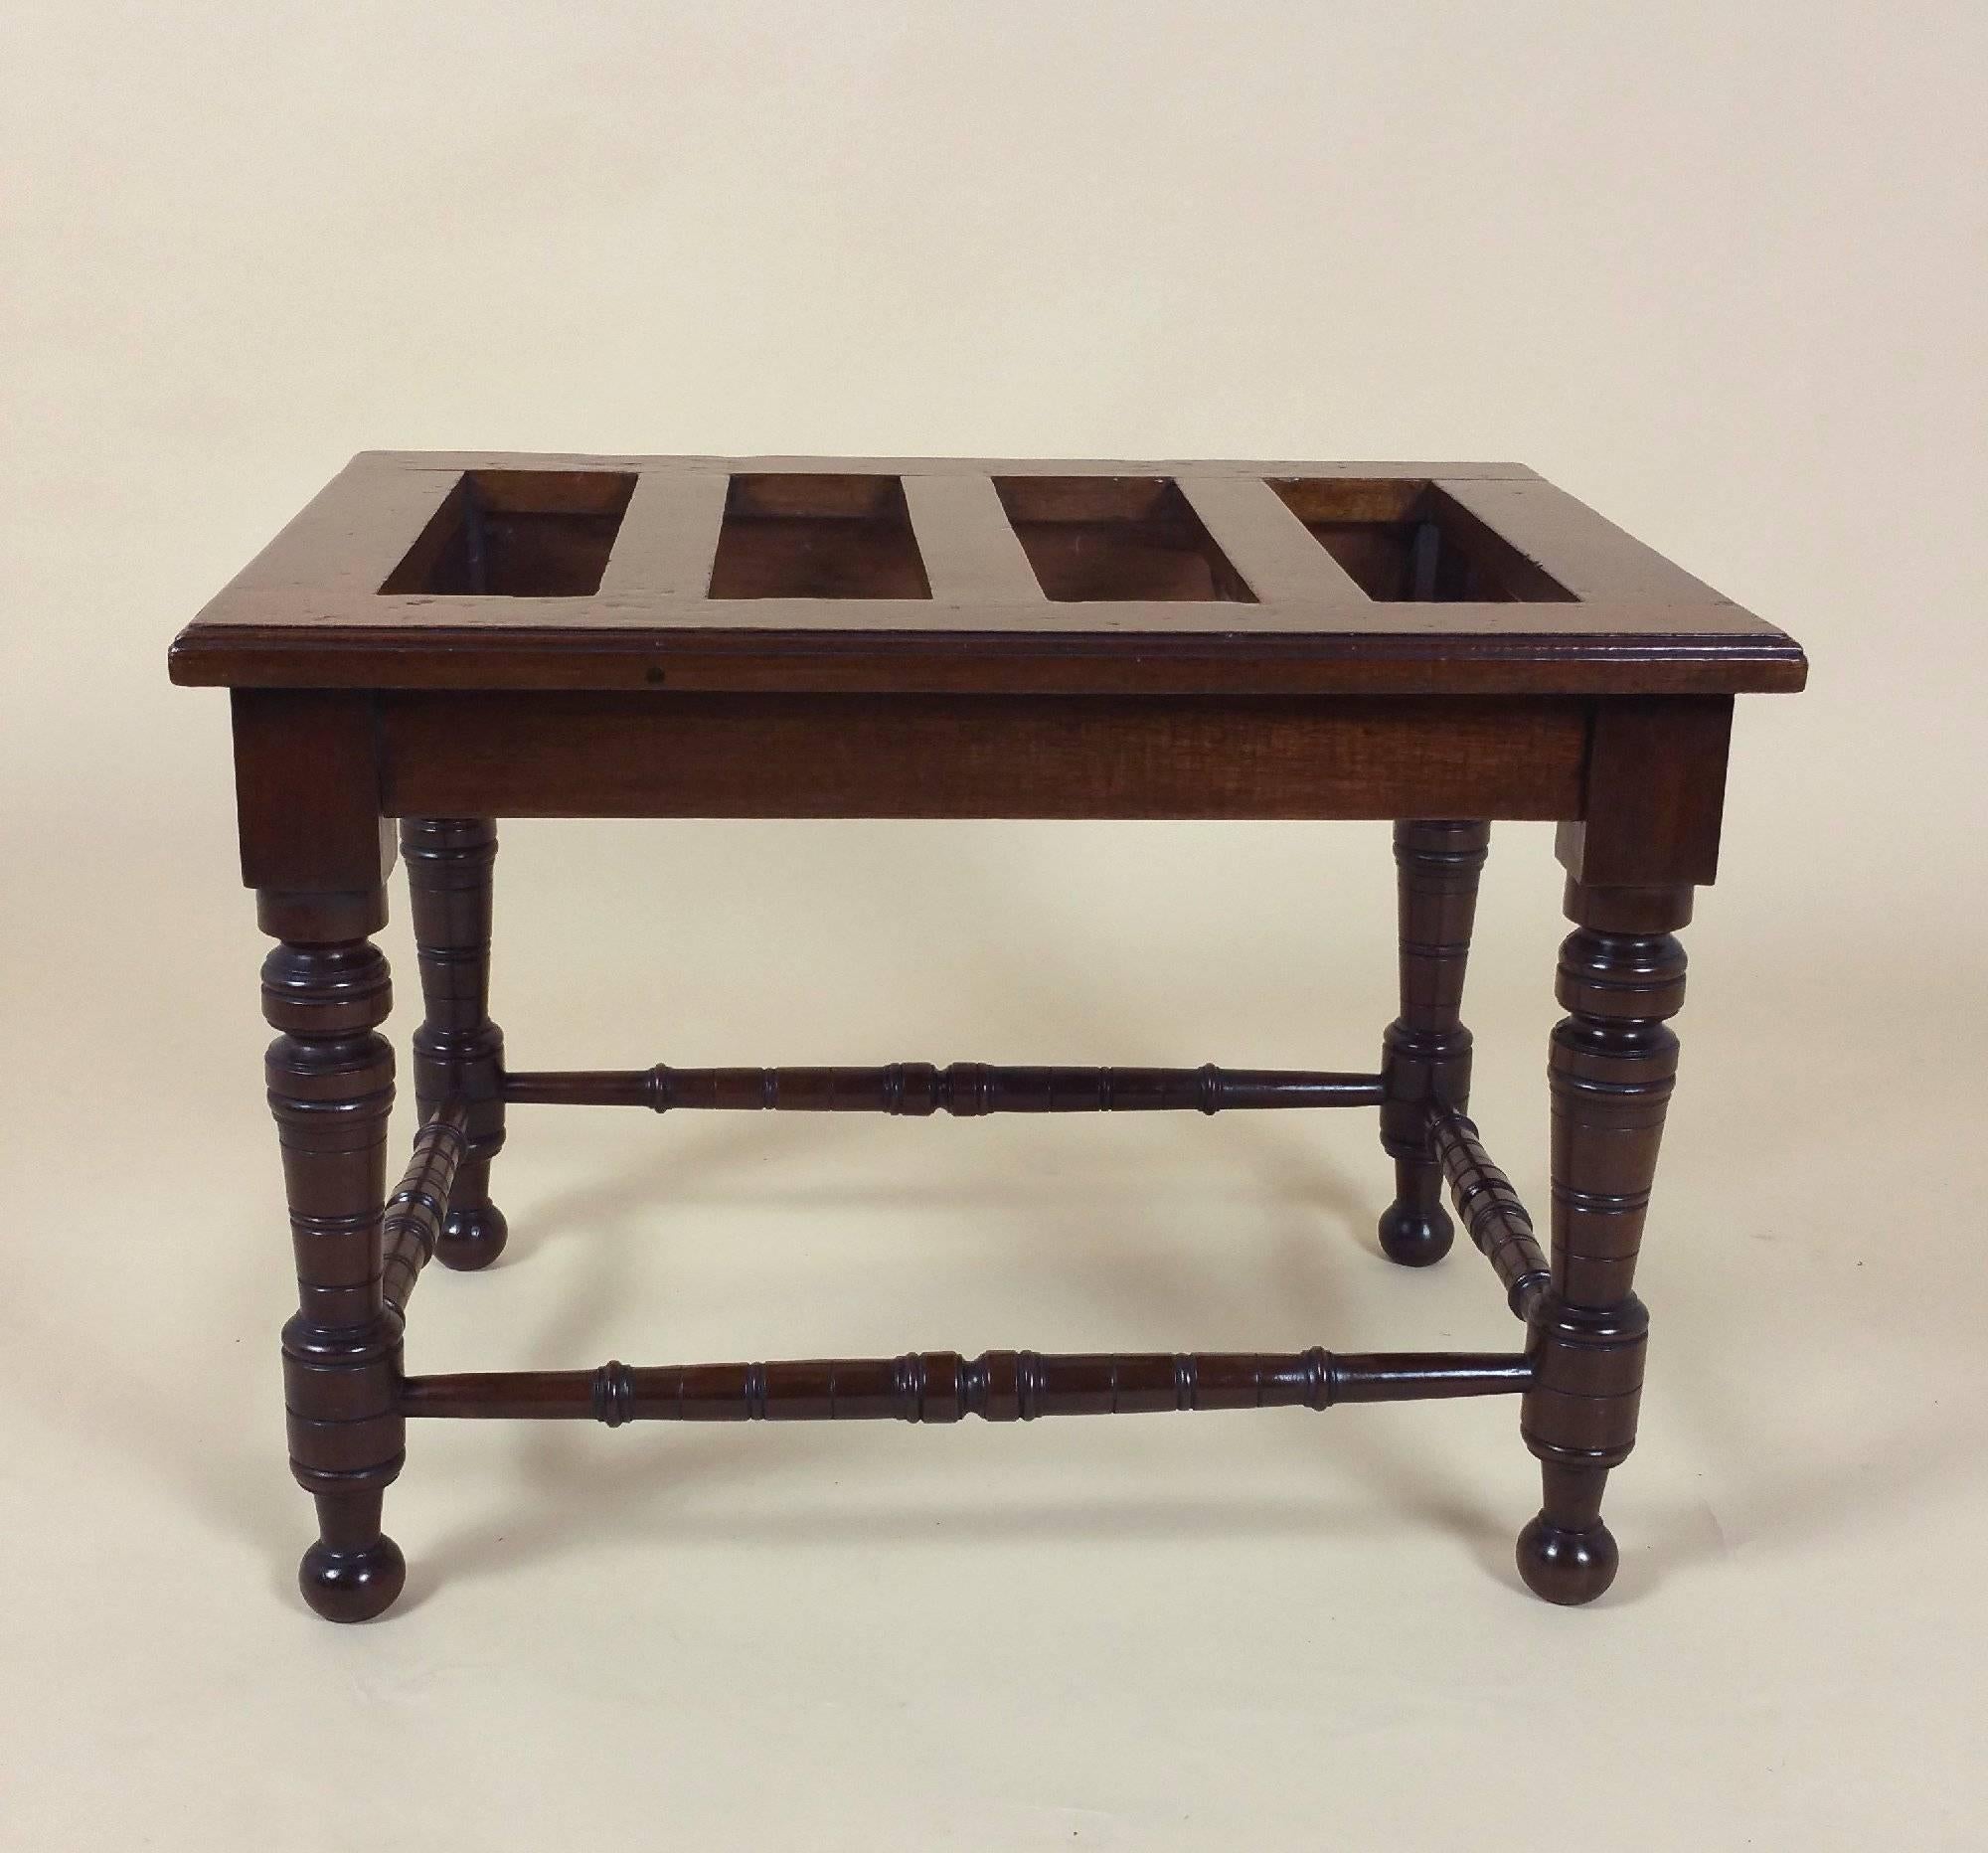 Victorian Walnut Luggage Stand In Excellent Condition In London, west Sussex